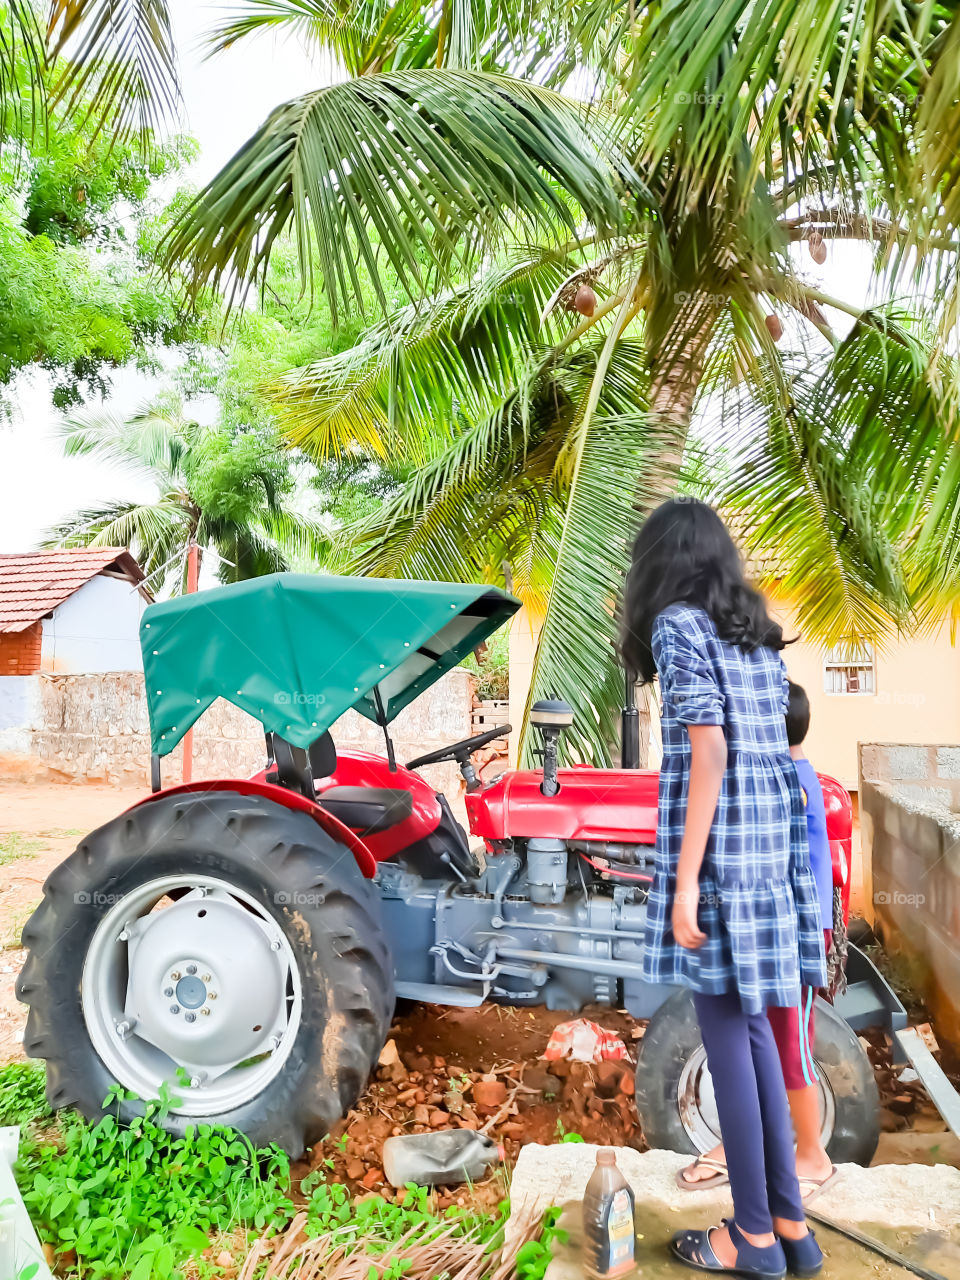 Tractor or truck in a village farm house